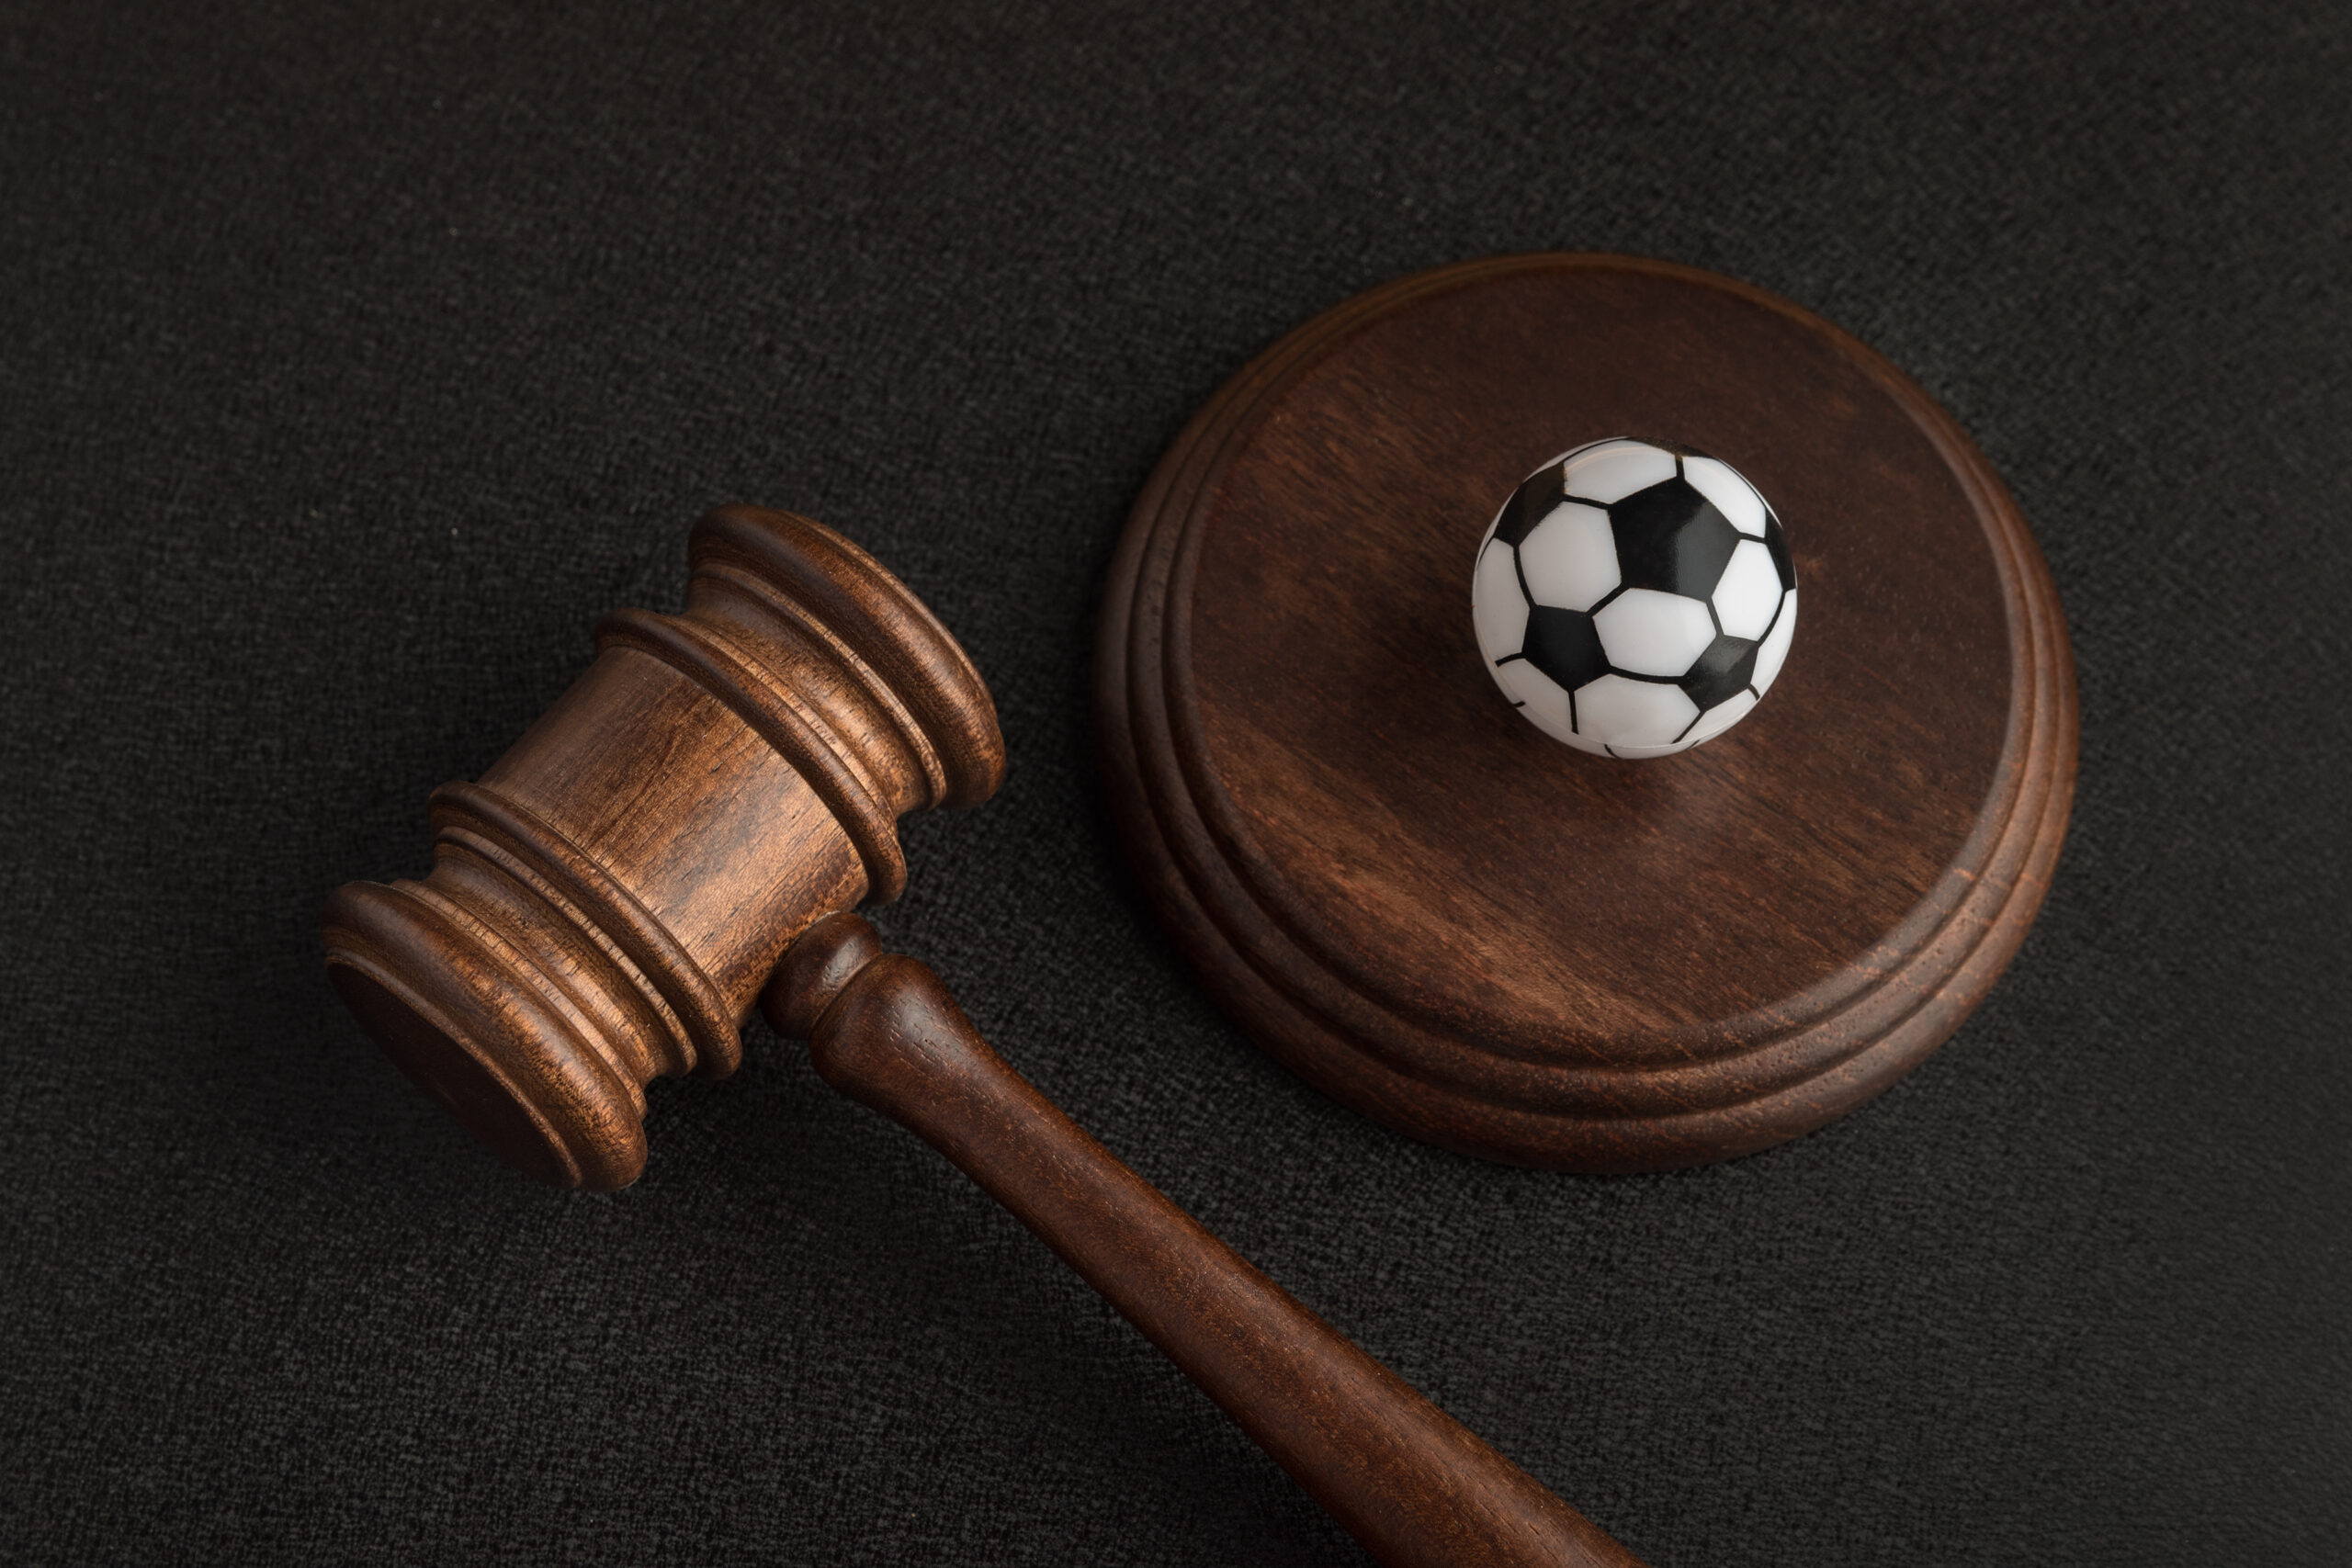 Wooden judge gavel and toy soccer ball. Football coach accused. Concussion lawsuit